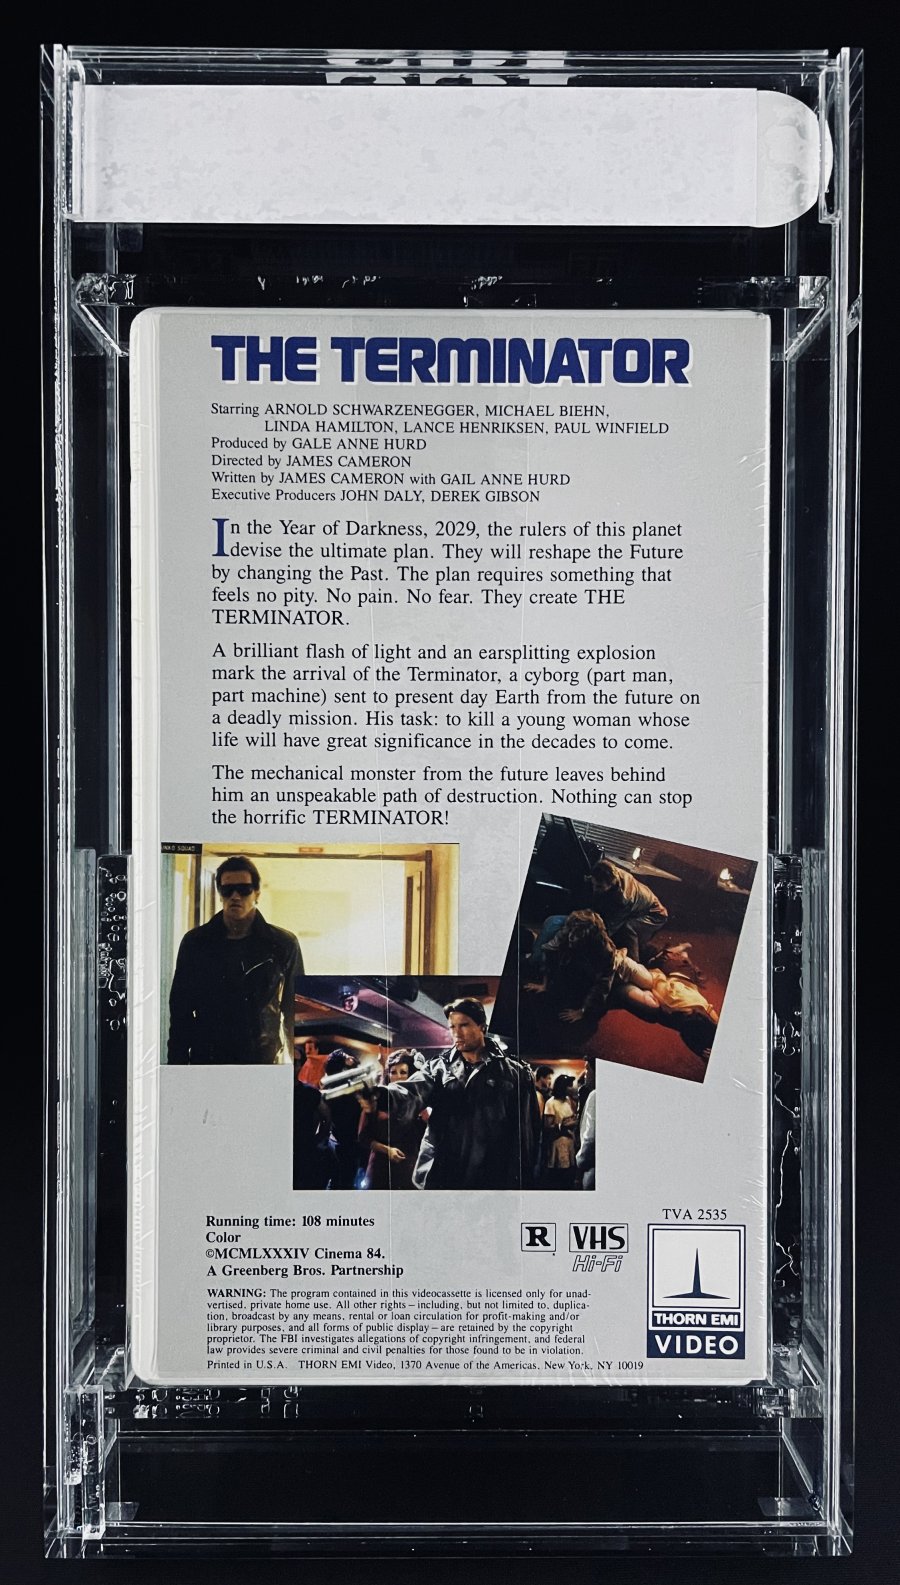 The Terminator VHS Back sold on Comic Connect